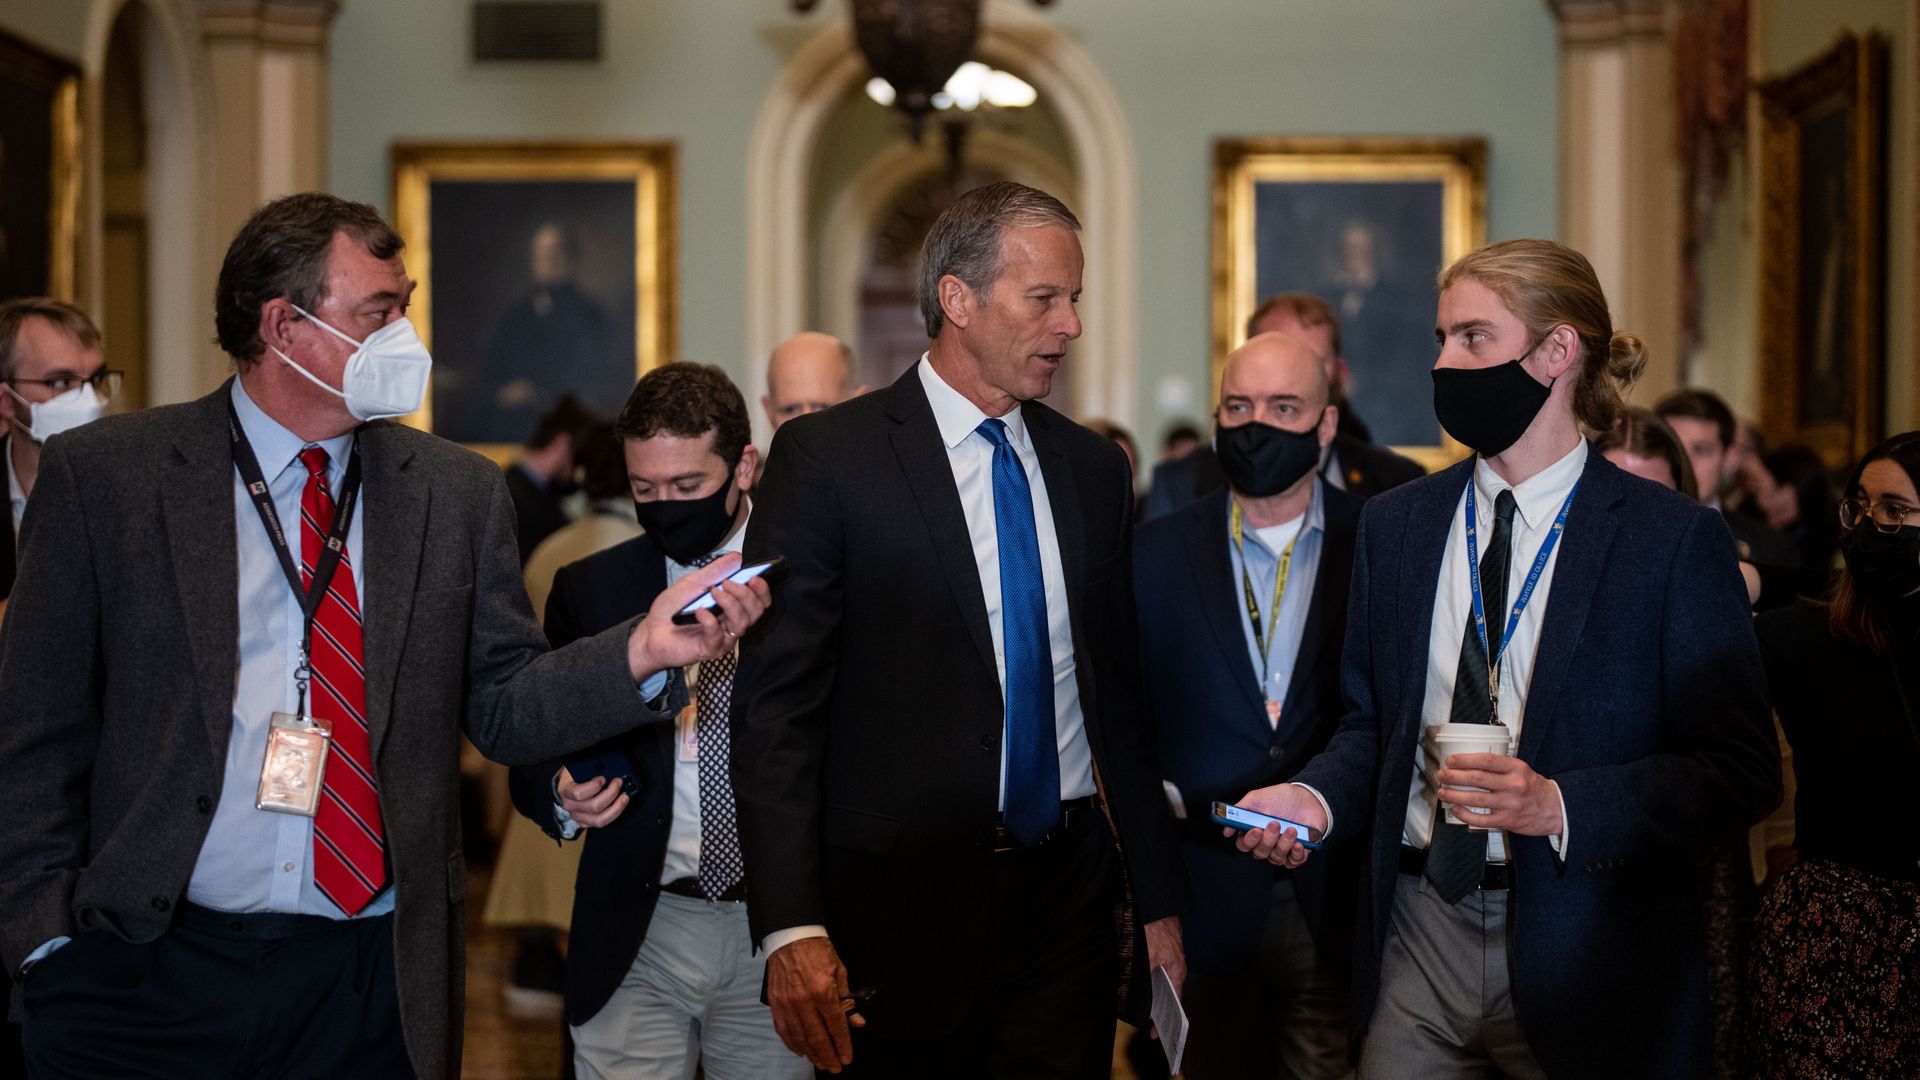 Reporters are seen gathering around Sen. John Thune - the minority whip - ahead of the Republican Party's weekly lunch on Tuesday.